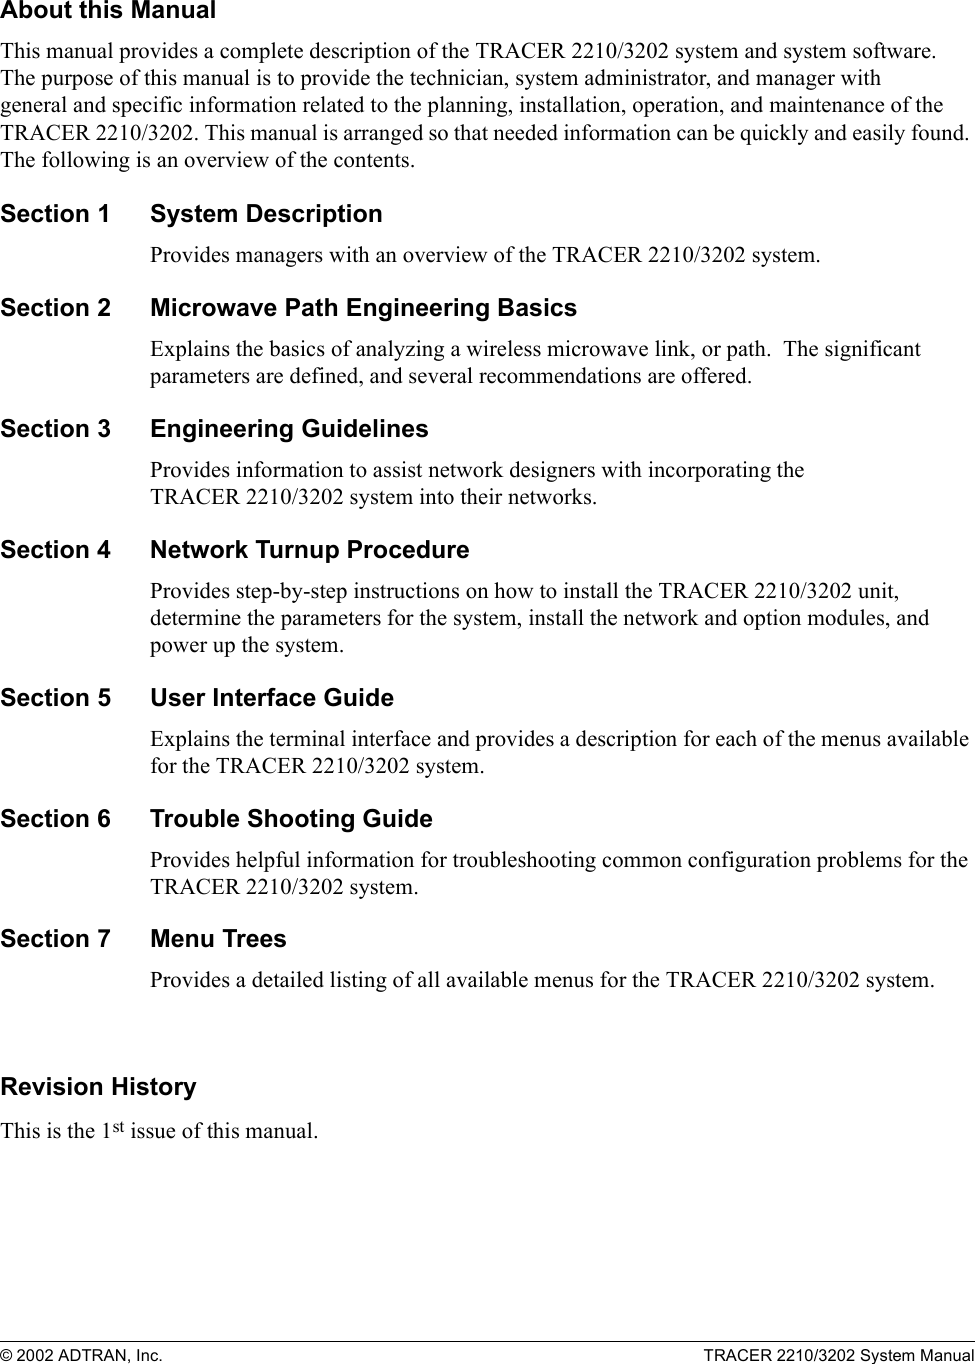 © 2002 ADTRAN, Inc. TRACER 2210/3202 System ManualAbout this ManualThis manual provides a complete description of the TRACER 2210/3202 system and system software. The purpose of this manual is to provide the technician, system administrator, and manager with general and specific information related to the planning, installation, operation, and maintenance of the TRACER 2210/3202. This manual is arranged so that needed information can be quickly and easily found. The following is an overview of the contents.Section 1 System DescriptionProvides managers with an overview of the TRACER 2210/3202 system.Section 2 Microwave Path Engineering BasicsExplains the basics of analyzing a wireless microwave link, or path.  The significant parameters are defined, and several recommendations are offered.Section 3 Engineering GuidelinesProvides information to assist network designers with incorporating the TRACER 2210/3202 system into their networks.Section 4 Network Turnup ProcedureProvides step-by-step instructions on how to install the TRACER 2210/3202 unit, determine the parameters for the system, install the network and option modules, and power up the system.Section 5 User Interface Guide Explains the terminal interface and provides a description for each of the menus available for the TRACER 2210/3202 system.Section 6 Trouble Shooting GuideProvides helpful information for troubleshooting common configuration problems for the TRACER 2210/3202 system.Section 7 Menu TreesProvides a detailed listing of all available menus for the TRACER 2210/3202 system.Revision HistoryThis is the 1st issue of this manual.